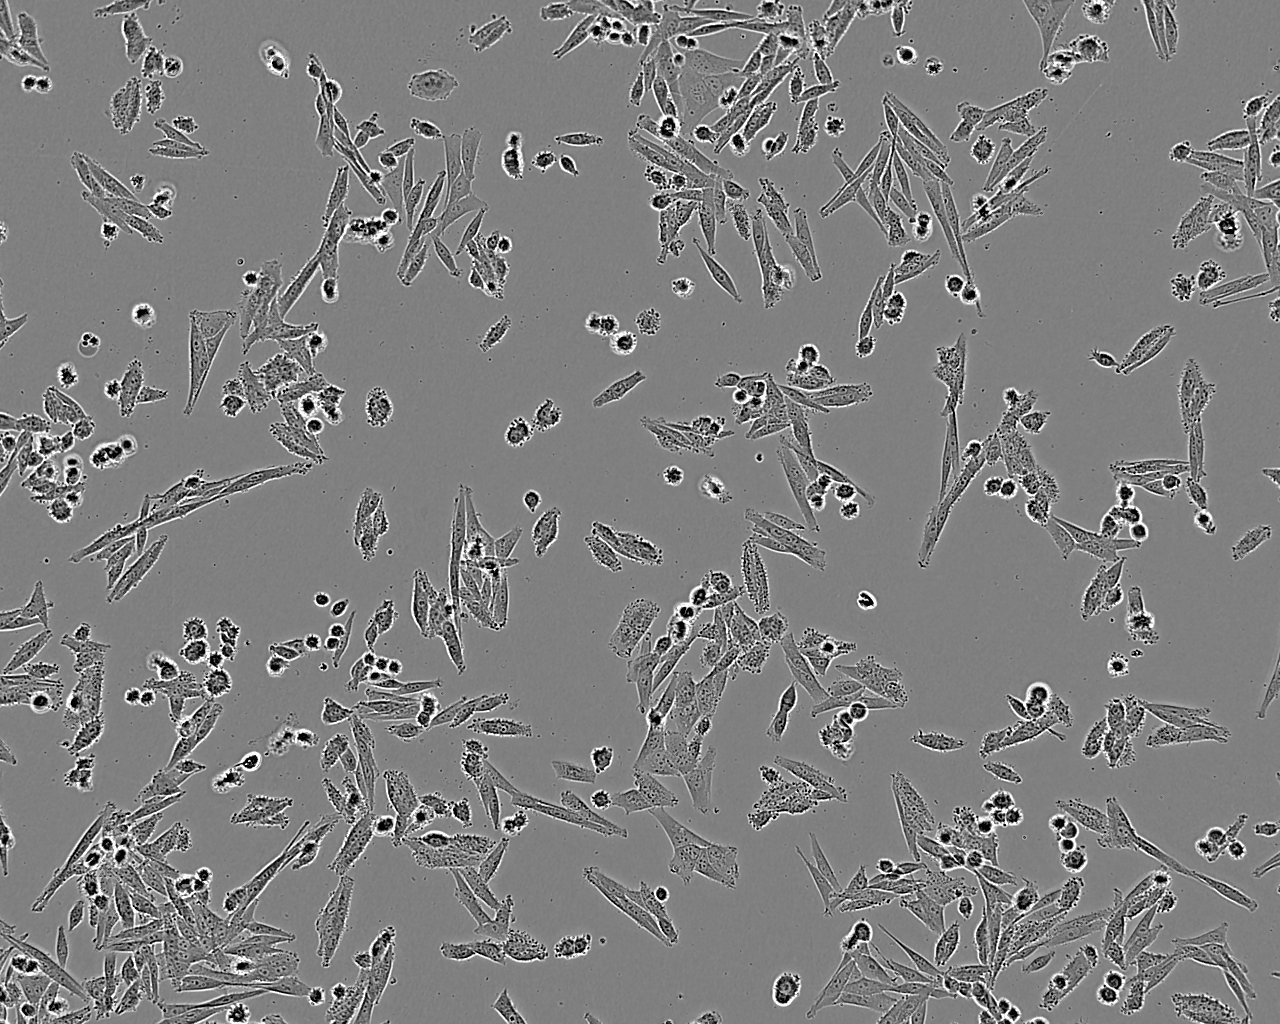 SNG-M epithelioid cells人子宫内膜癌细胞系,SNG-M epithelioid cells